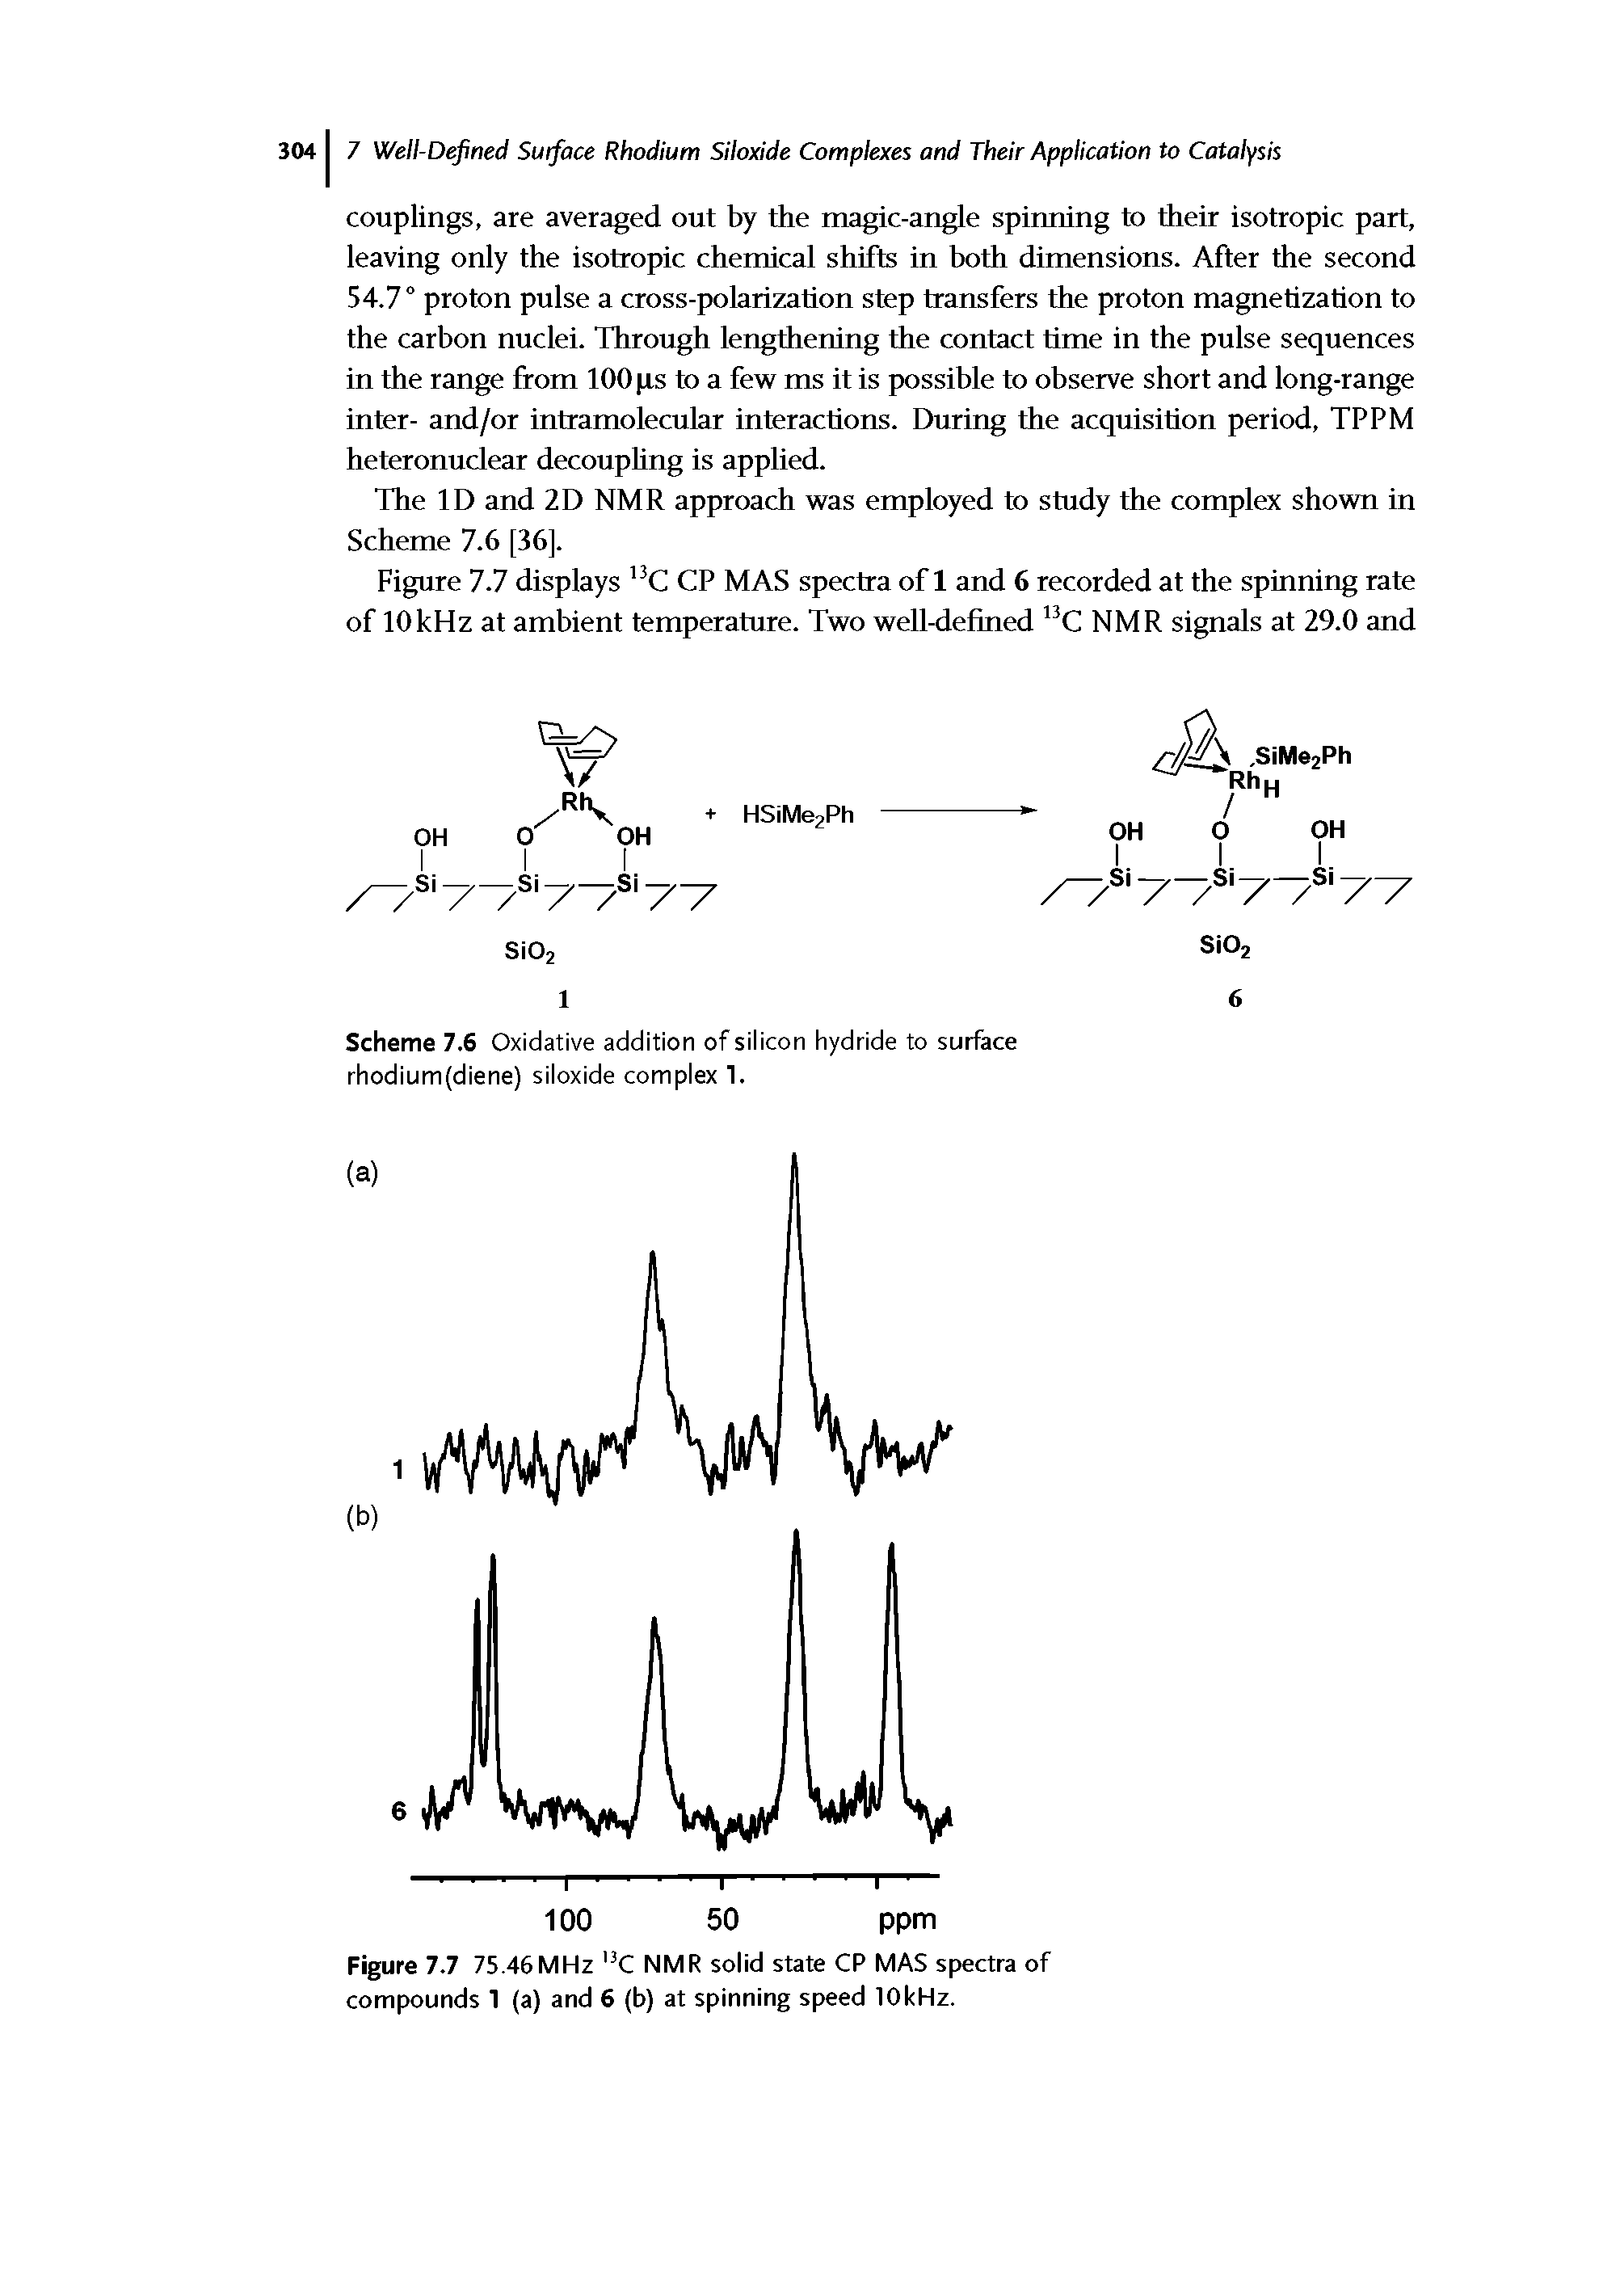 Figure 7.7 75.46MHz C NMR solid state CP MAS spectra of compounds 1 (a) and 6 (b) at spinning speed lOkHz.